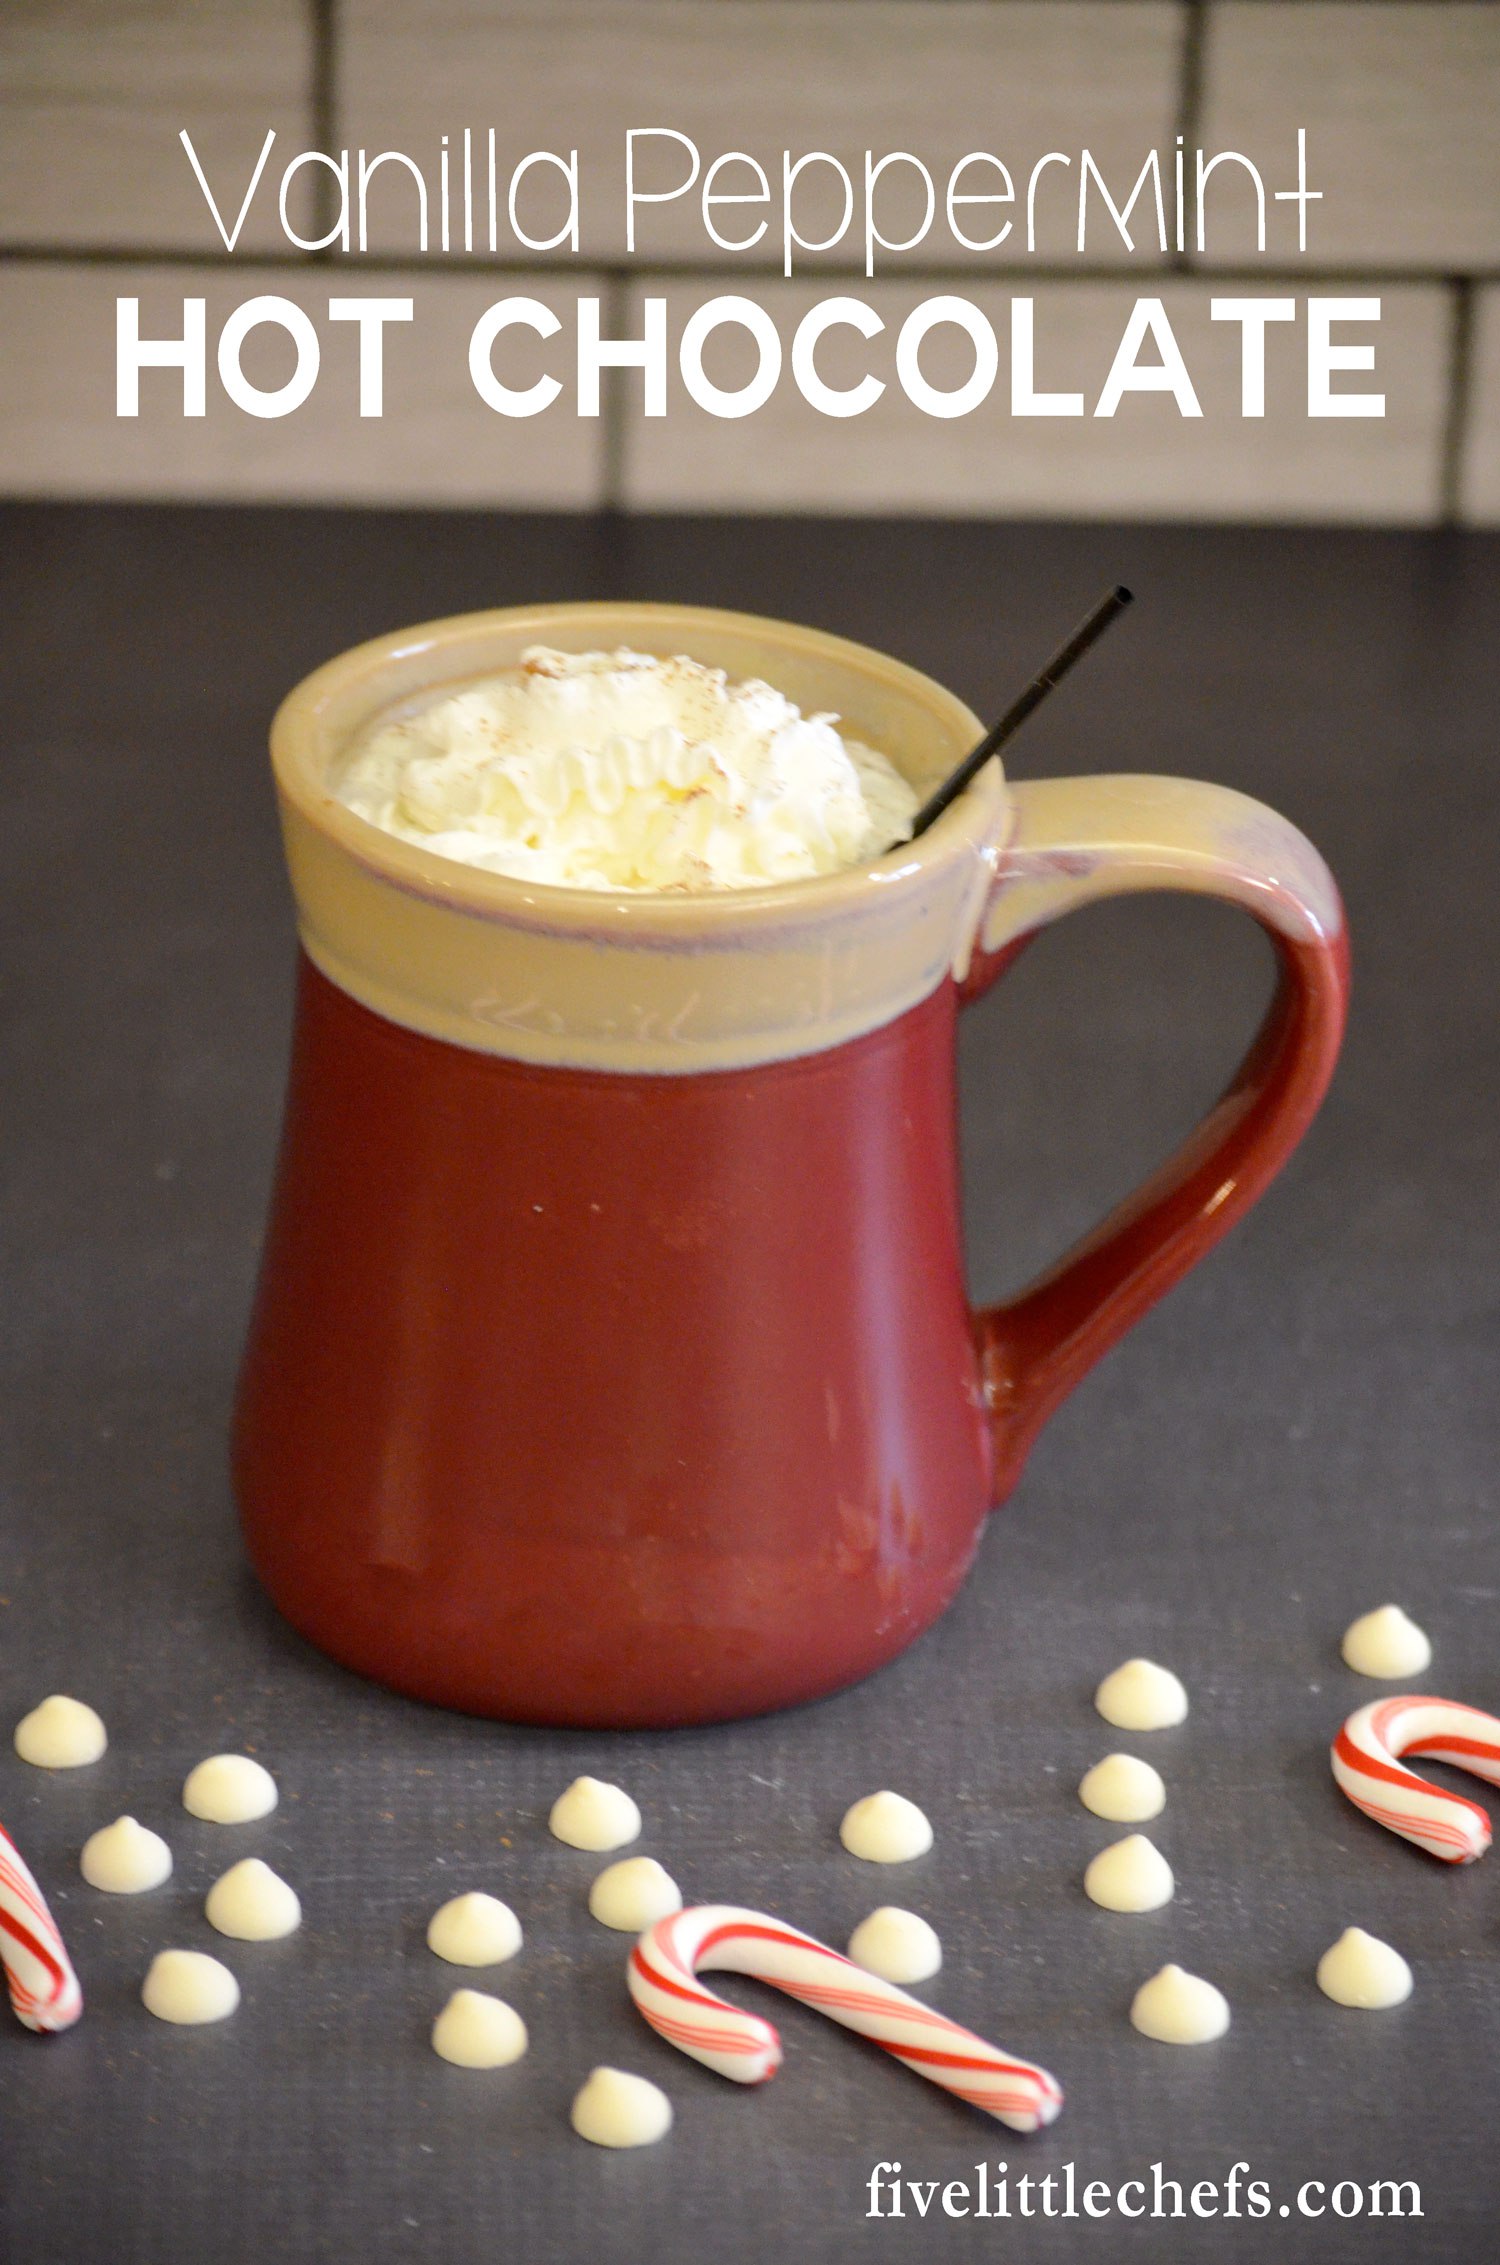 Homemade Vanilla Peppermint Hot Chocolate is surprisingly easy to make. It is creamy with a pop of peppermint. Delicious for a warm winter night or after playing in the snow.